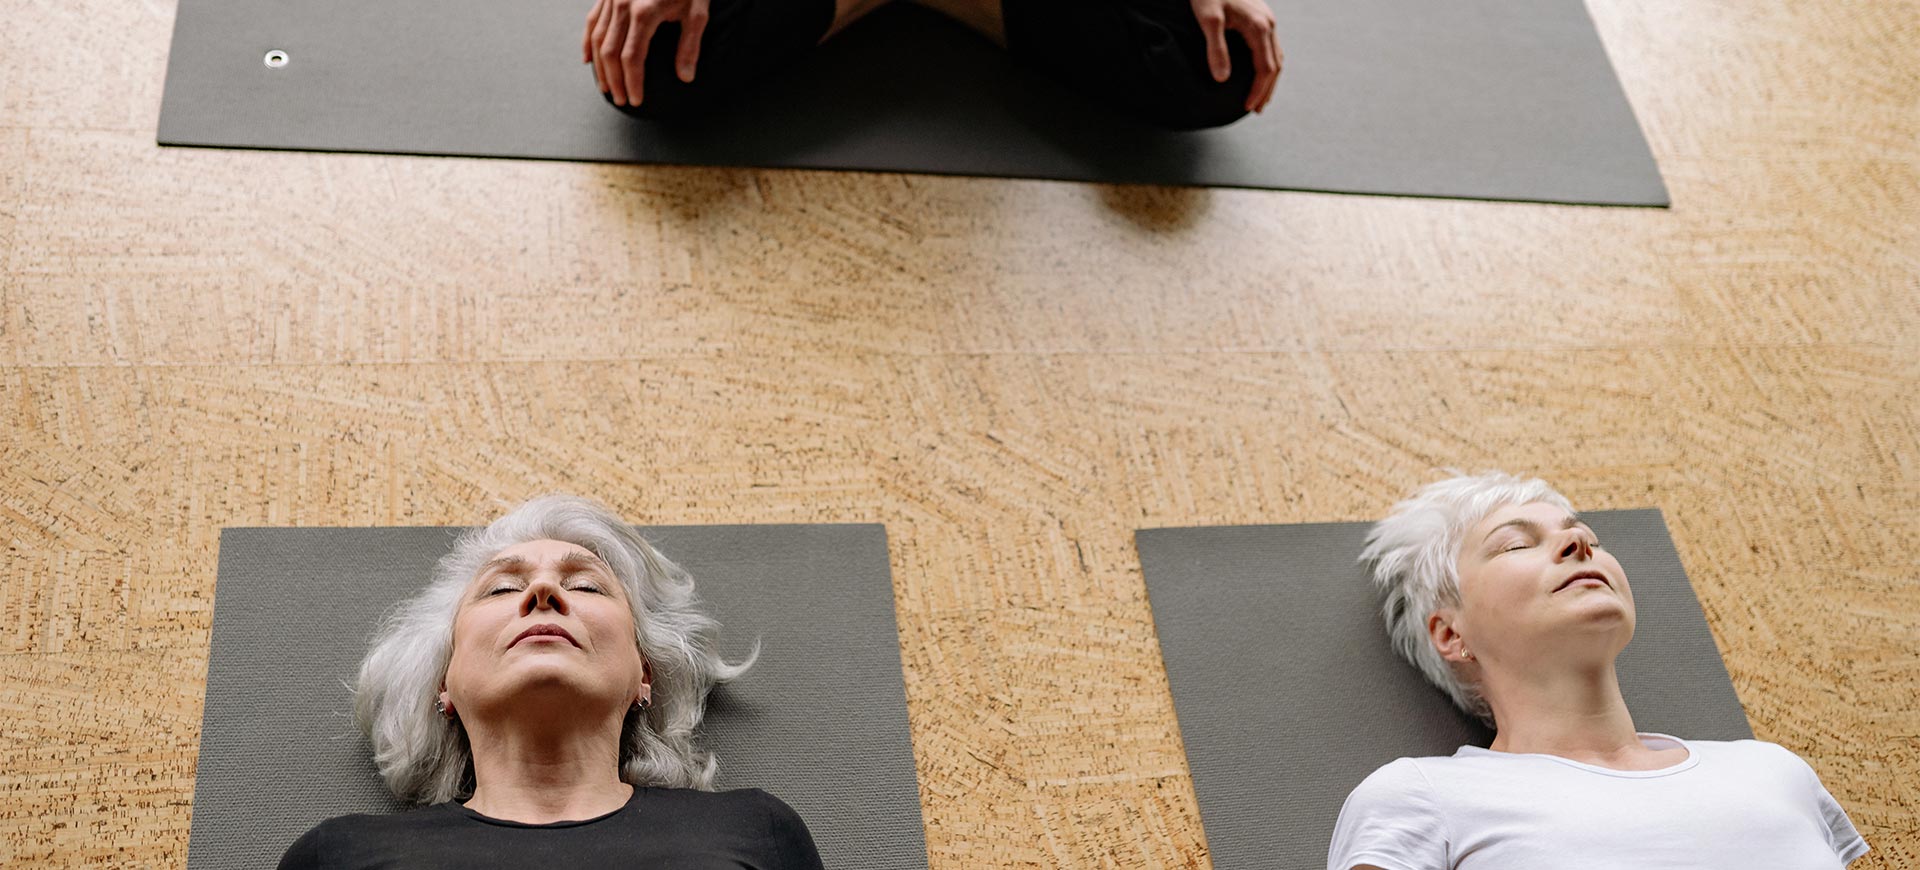 The Yoga Nidra Trend: Is It Real or Ruse?